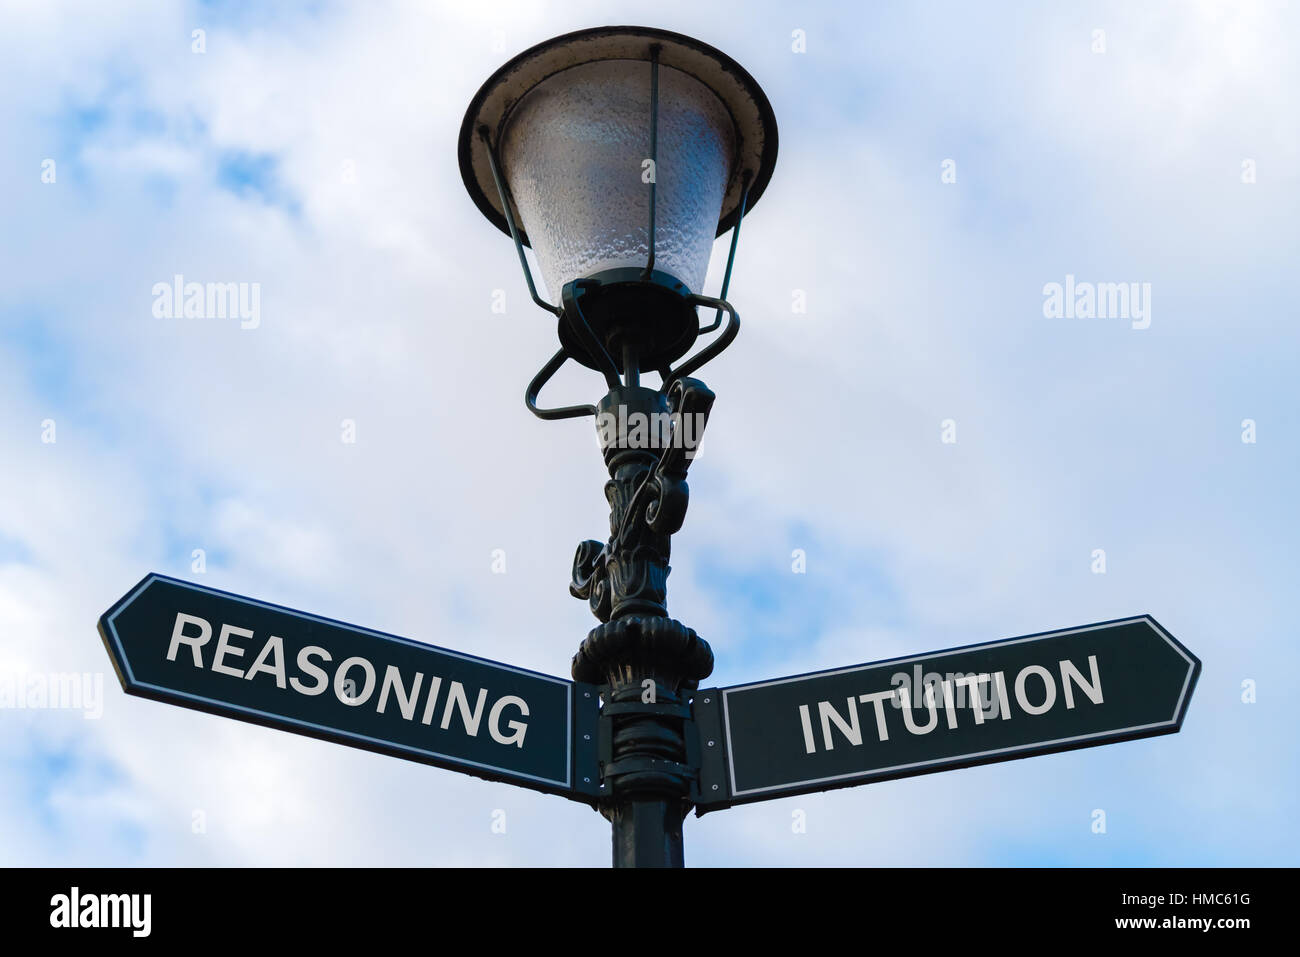 Street lighting pole with two opposite directional arrows over blue cloudy background. Reasoning versus Intuition concept. Stock Photo